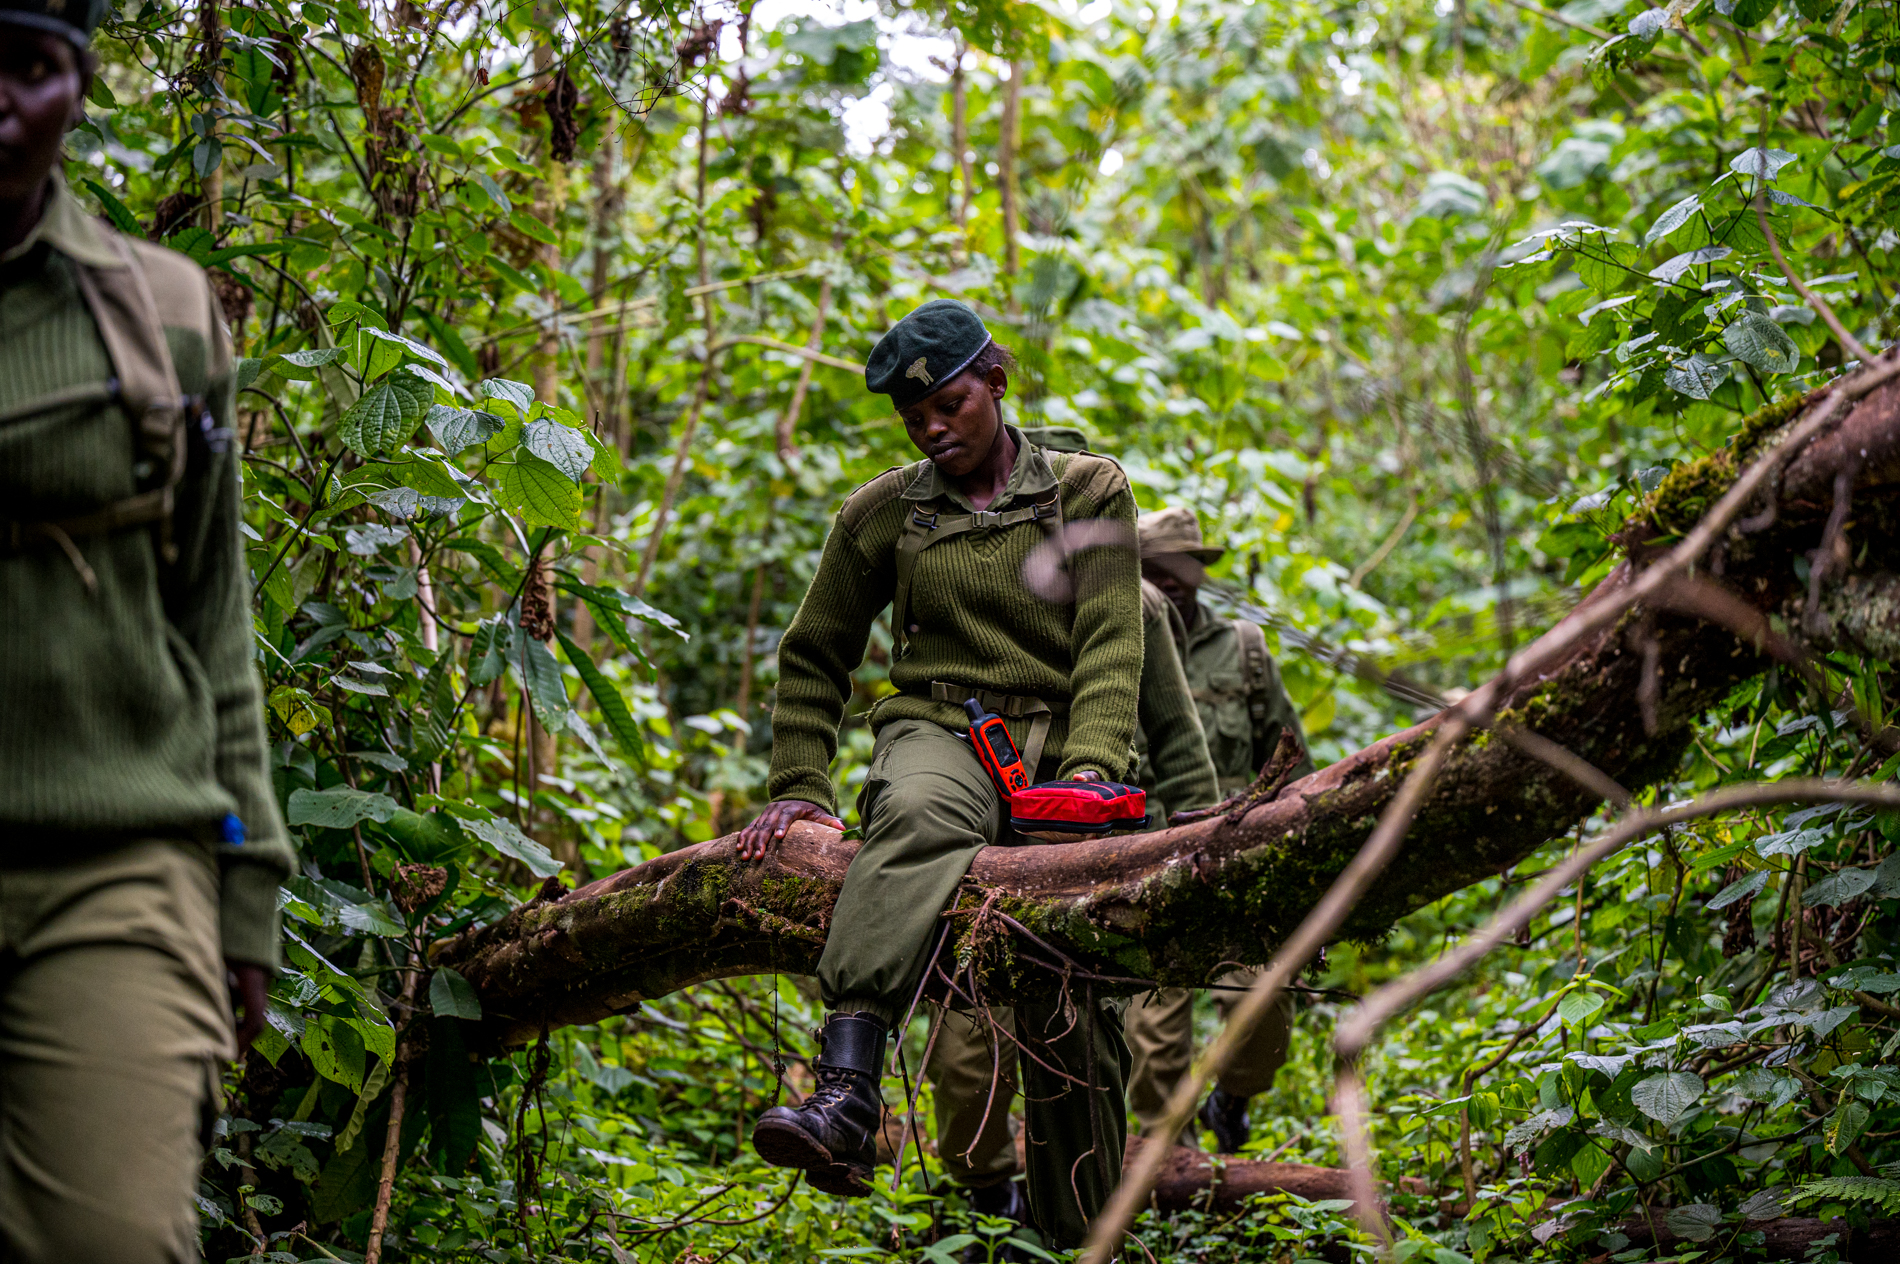 Mau Rangers help protect critical forests